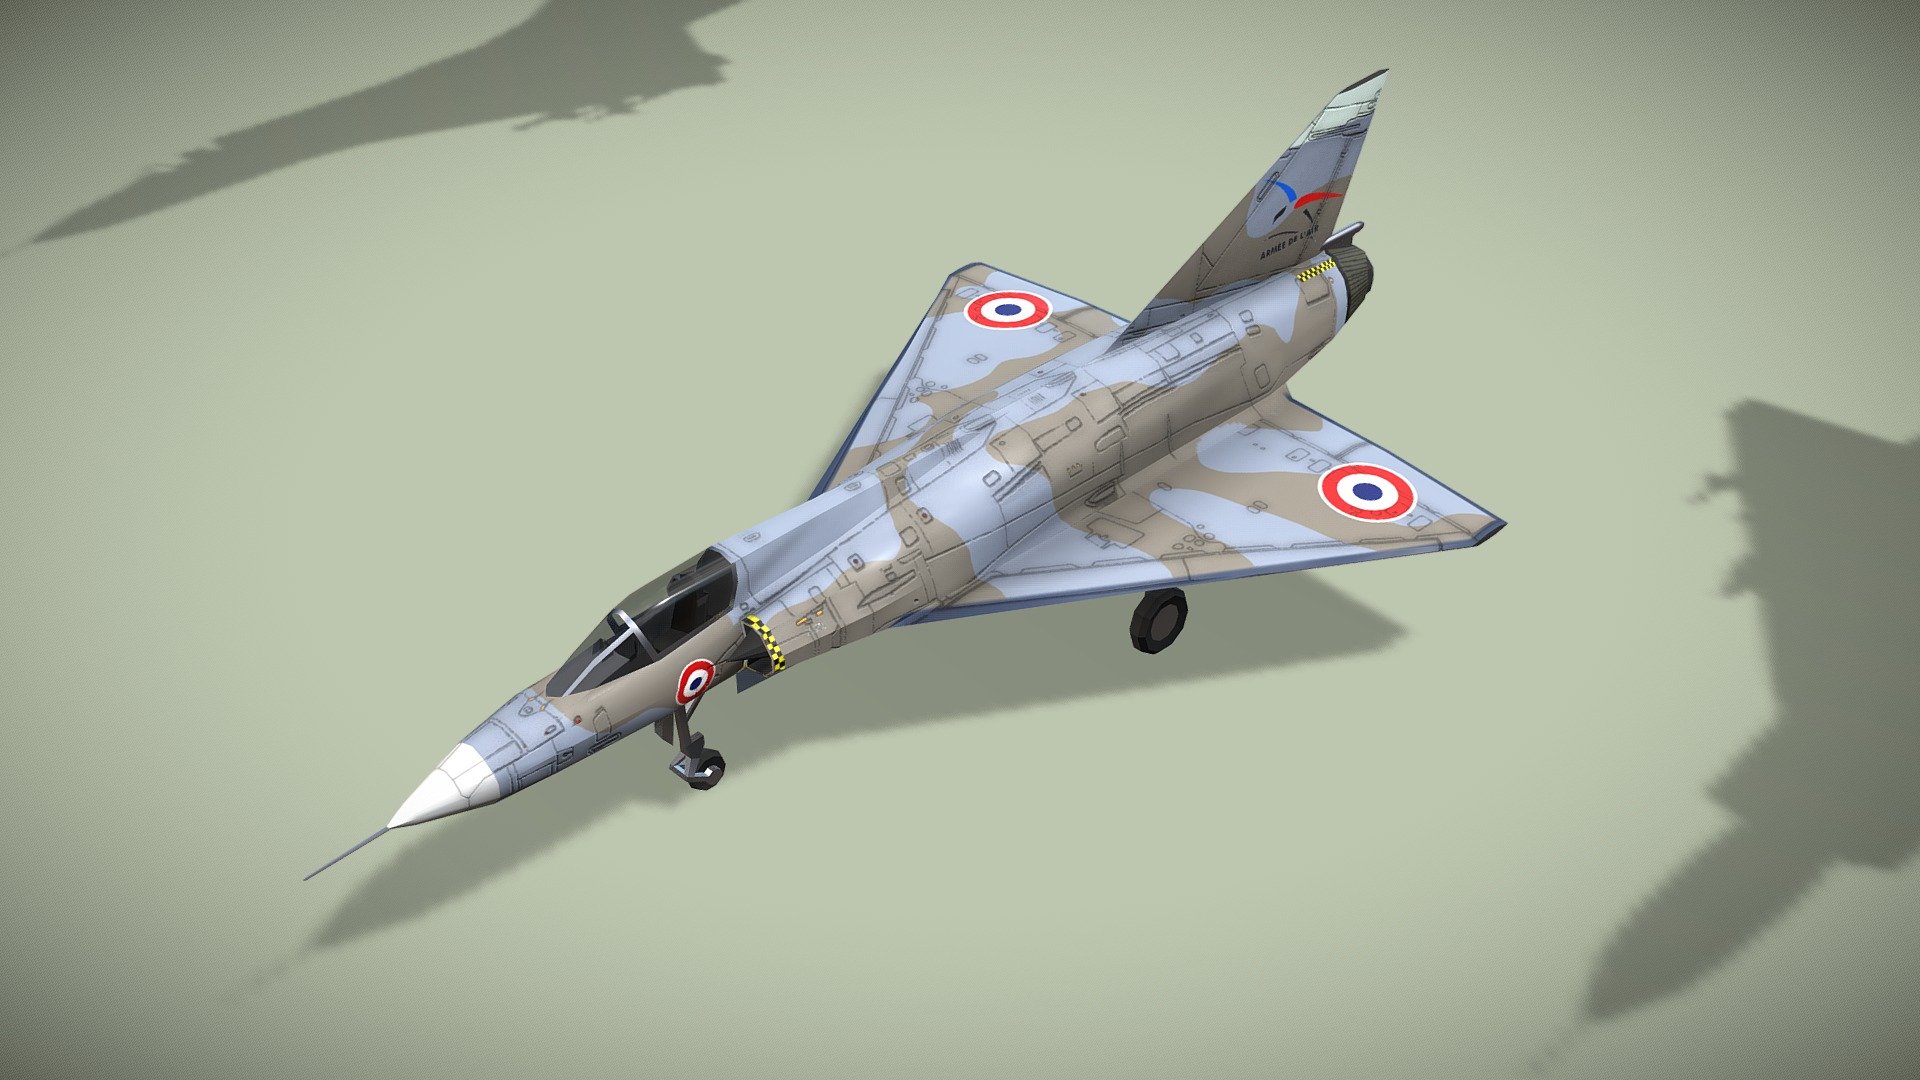 Dassault Mirage III

Lowpoly model of french jet fighter



Dassault Mirage III is a family of single/dual-seat, single-engine, fighter aircraft. It was the first Western European combat aircraft to exceed Mach 2. The Mirage III was produced in large numbers for both the French Air Force and a wide number of export customers. Often considered to be a second-generation fighter aircraft. During its service with the French Air Force, the Mirage III was normally armed with assorted air-to-ground ordnance or R.550 Magic air-to-air missiles. Its design proved to be relatively versatile, allowing the fighter model to have been readily adapted to serve in a variety of roles, including trainer, reconnaissance and ground-attack versions.



1 standing version and 2 flying versions in set.

Model has bump map, roughness map and 3 x diffuse textures.



Check also my other aircrafts and cars.

Patreon with monthly free model - Dassault Mirage III - Buy Royalty Free 3D model by NETRUNNER_pl 3d model